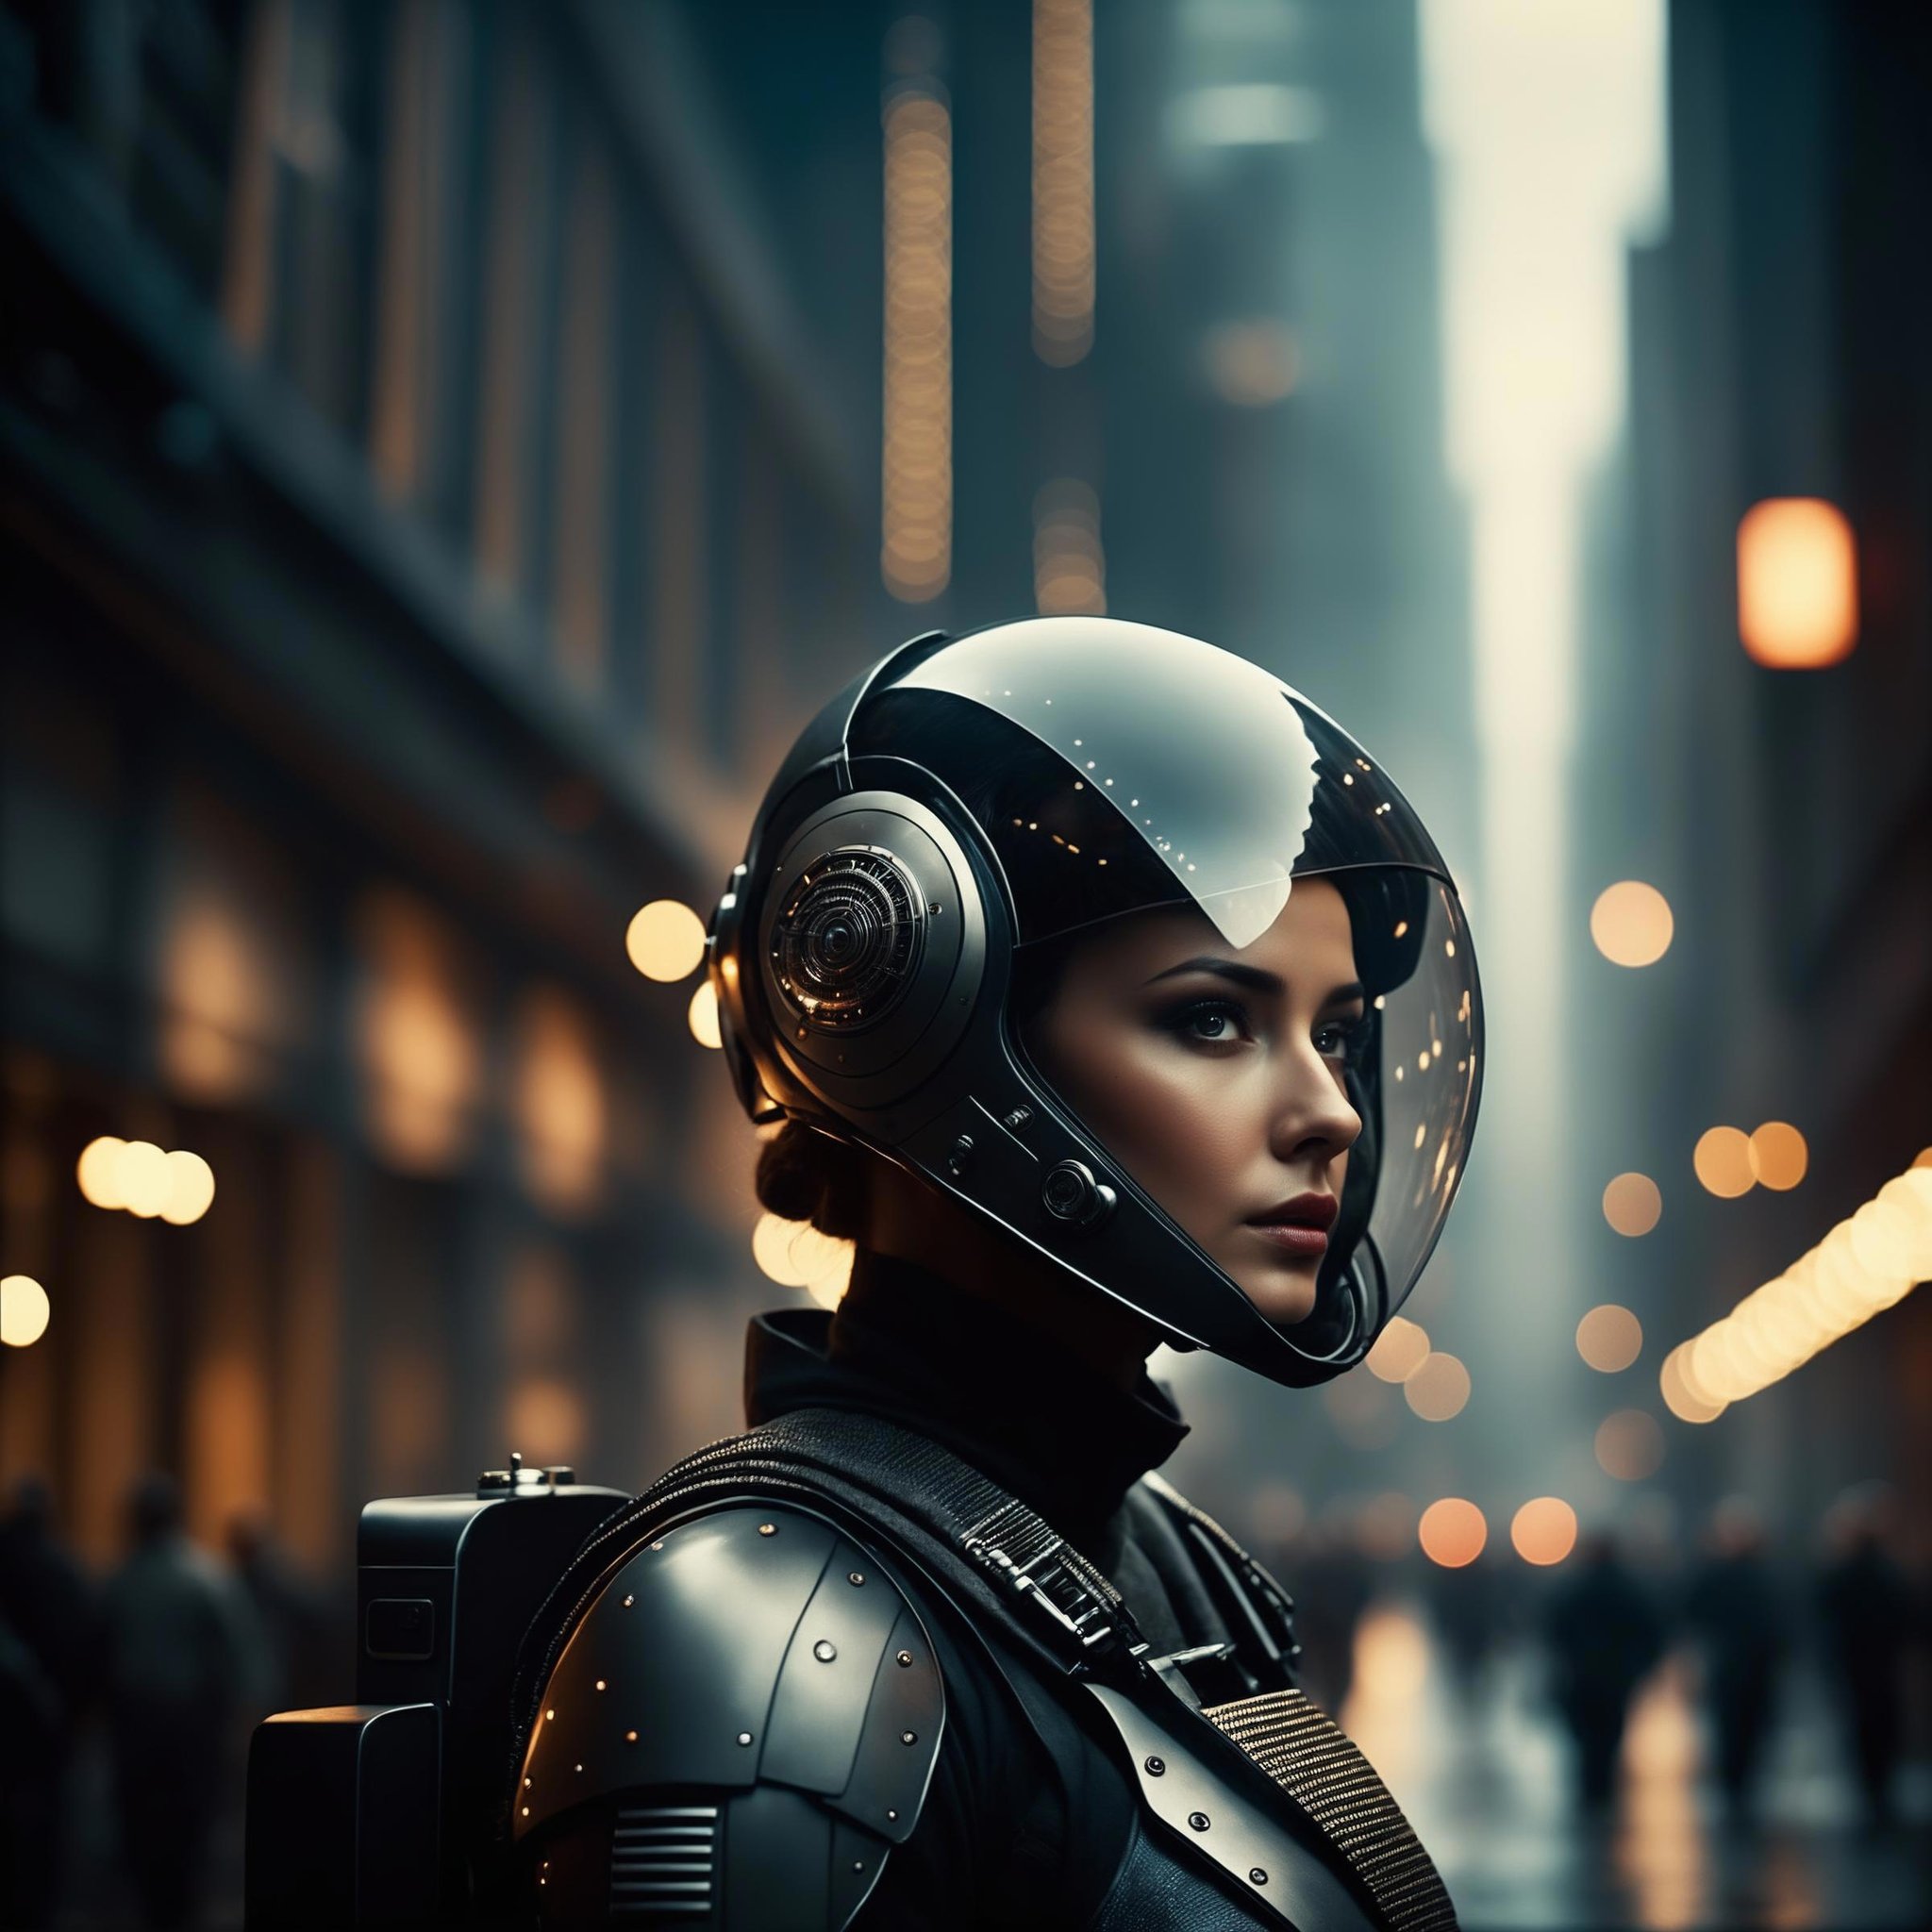 cinematic film still, a city, a dystopian future, year 3000, sci fi, amazing details, dark atmosphere, shallow depth of field, vignette, highly detailed, high budget, bokeh, cinemascope, moody, epic, gorgeous, film